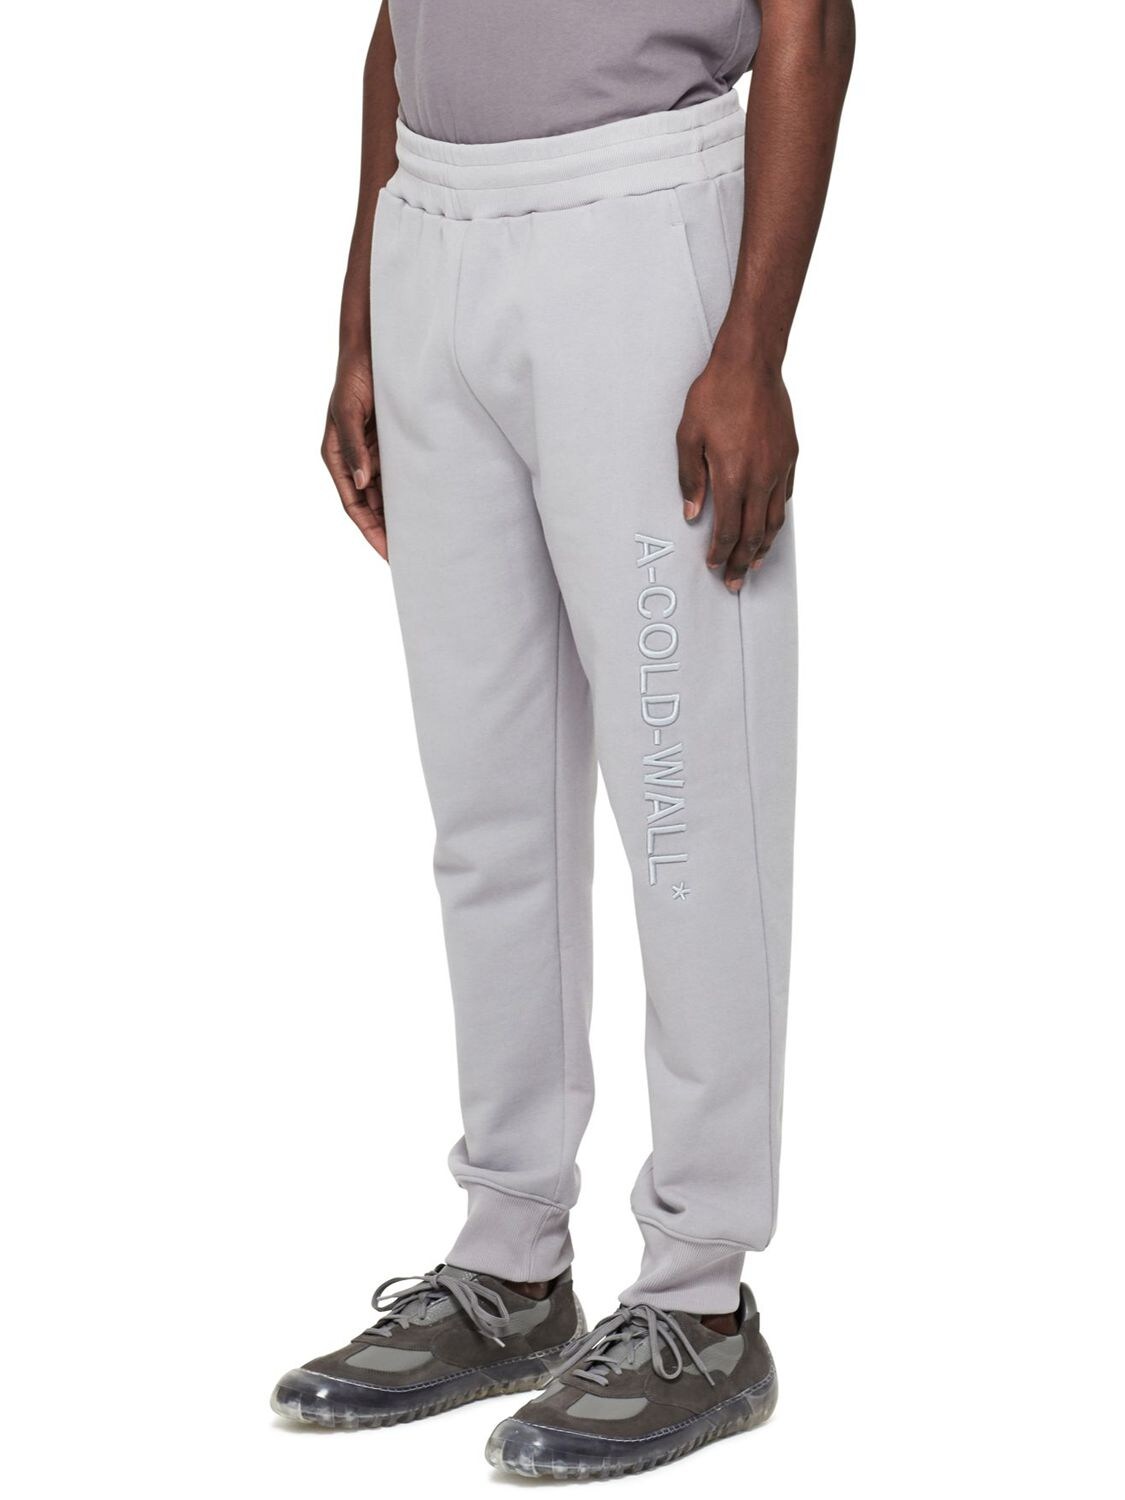 A-COLD-WALL* LOGO EMBROIDERED COTTON SWEATtrousers,74IIW0008-R1JFWQ2